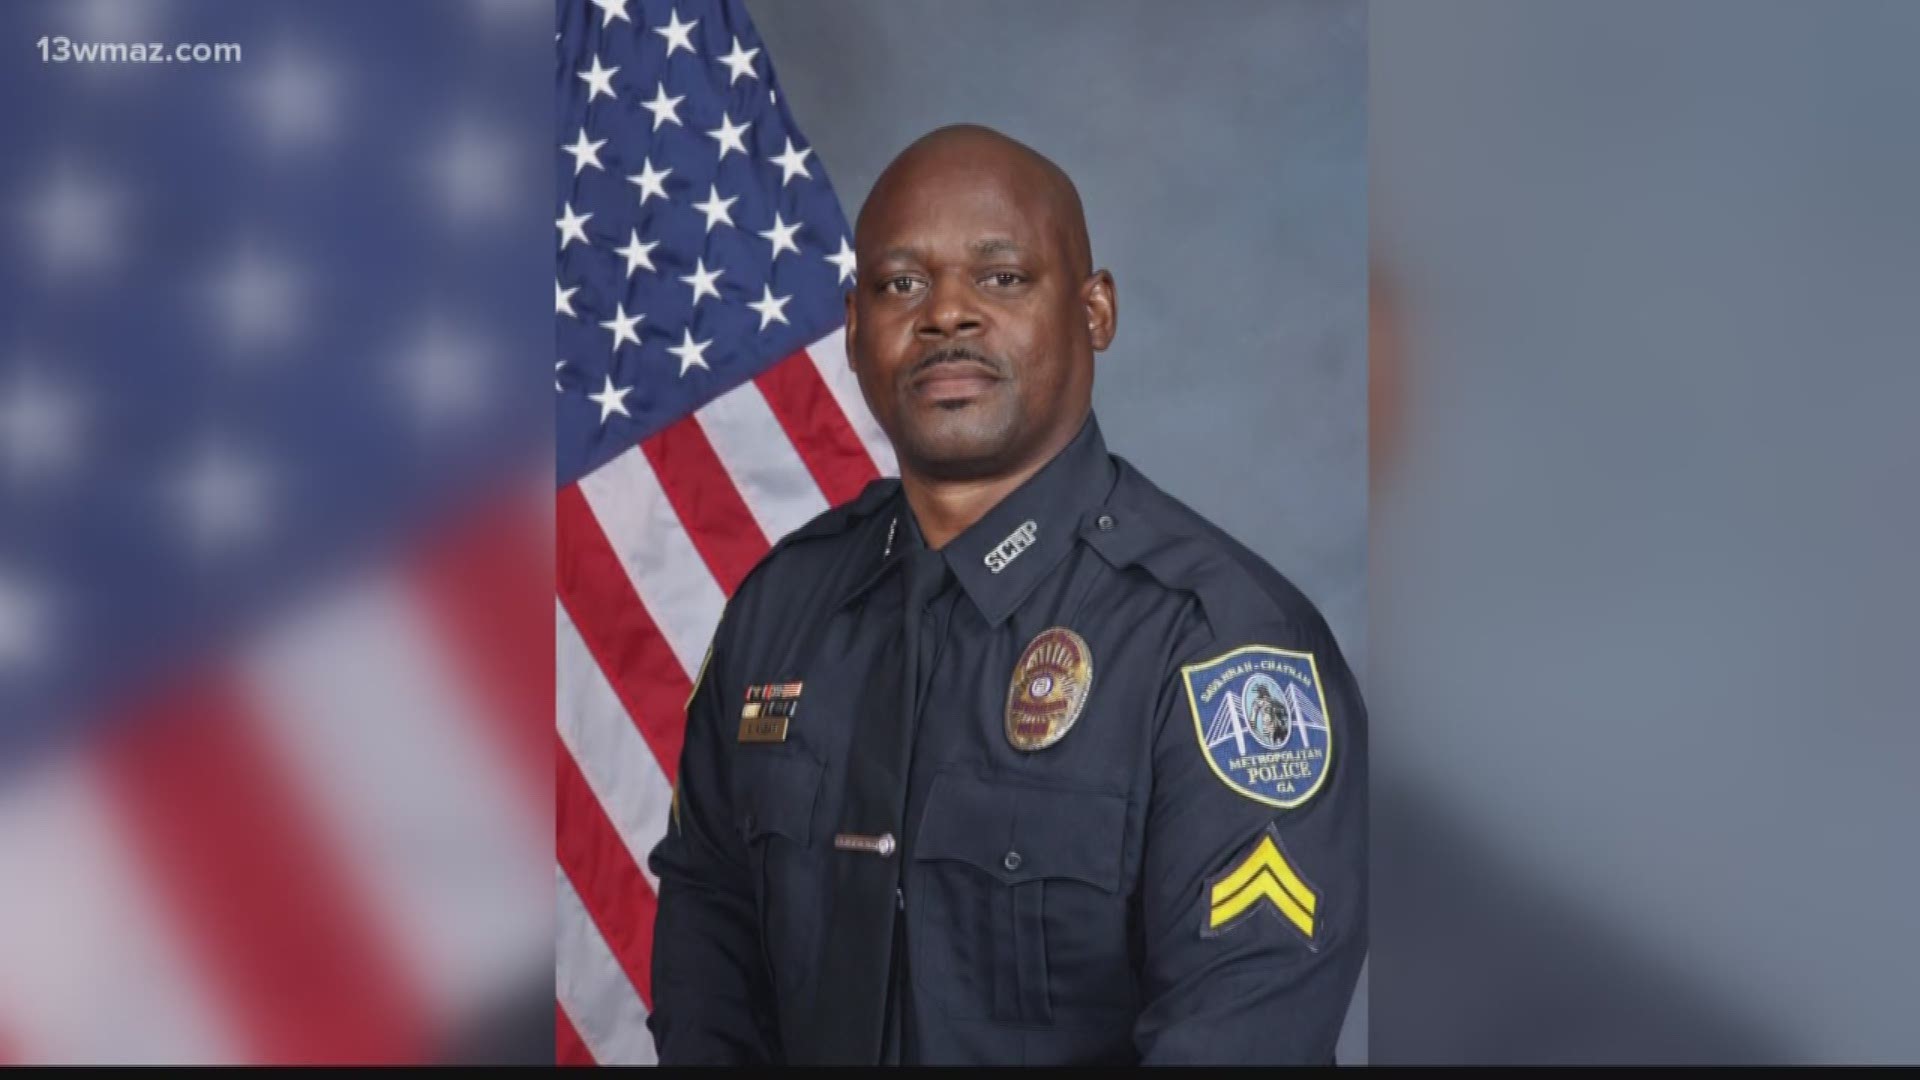 50-year-old Sergeant Kelvin Ansari was shot and killed in the line of duty during an officer-involved shooting Saturday night in Savannah, Georgia. The suspect was also shot and killed.